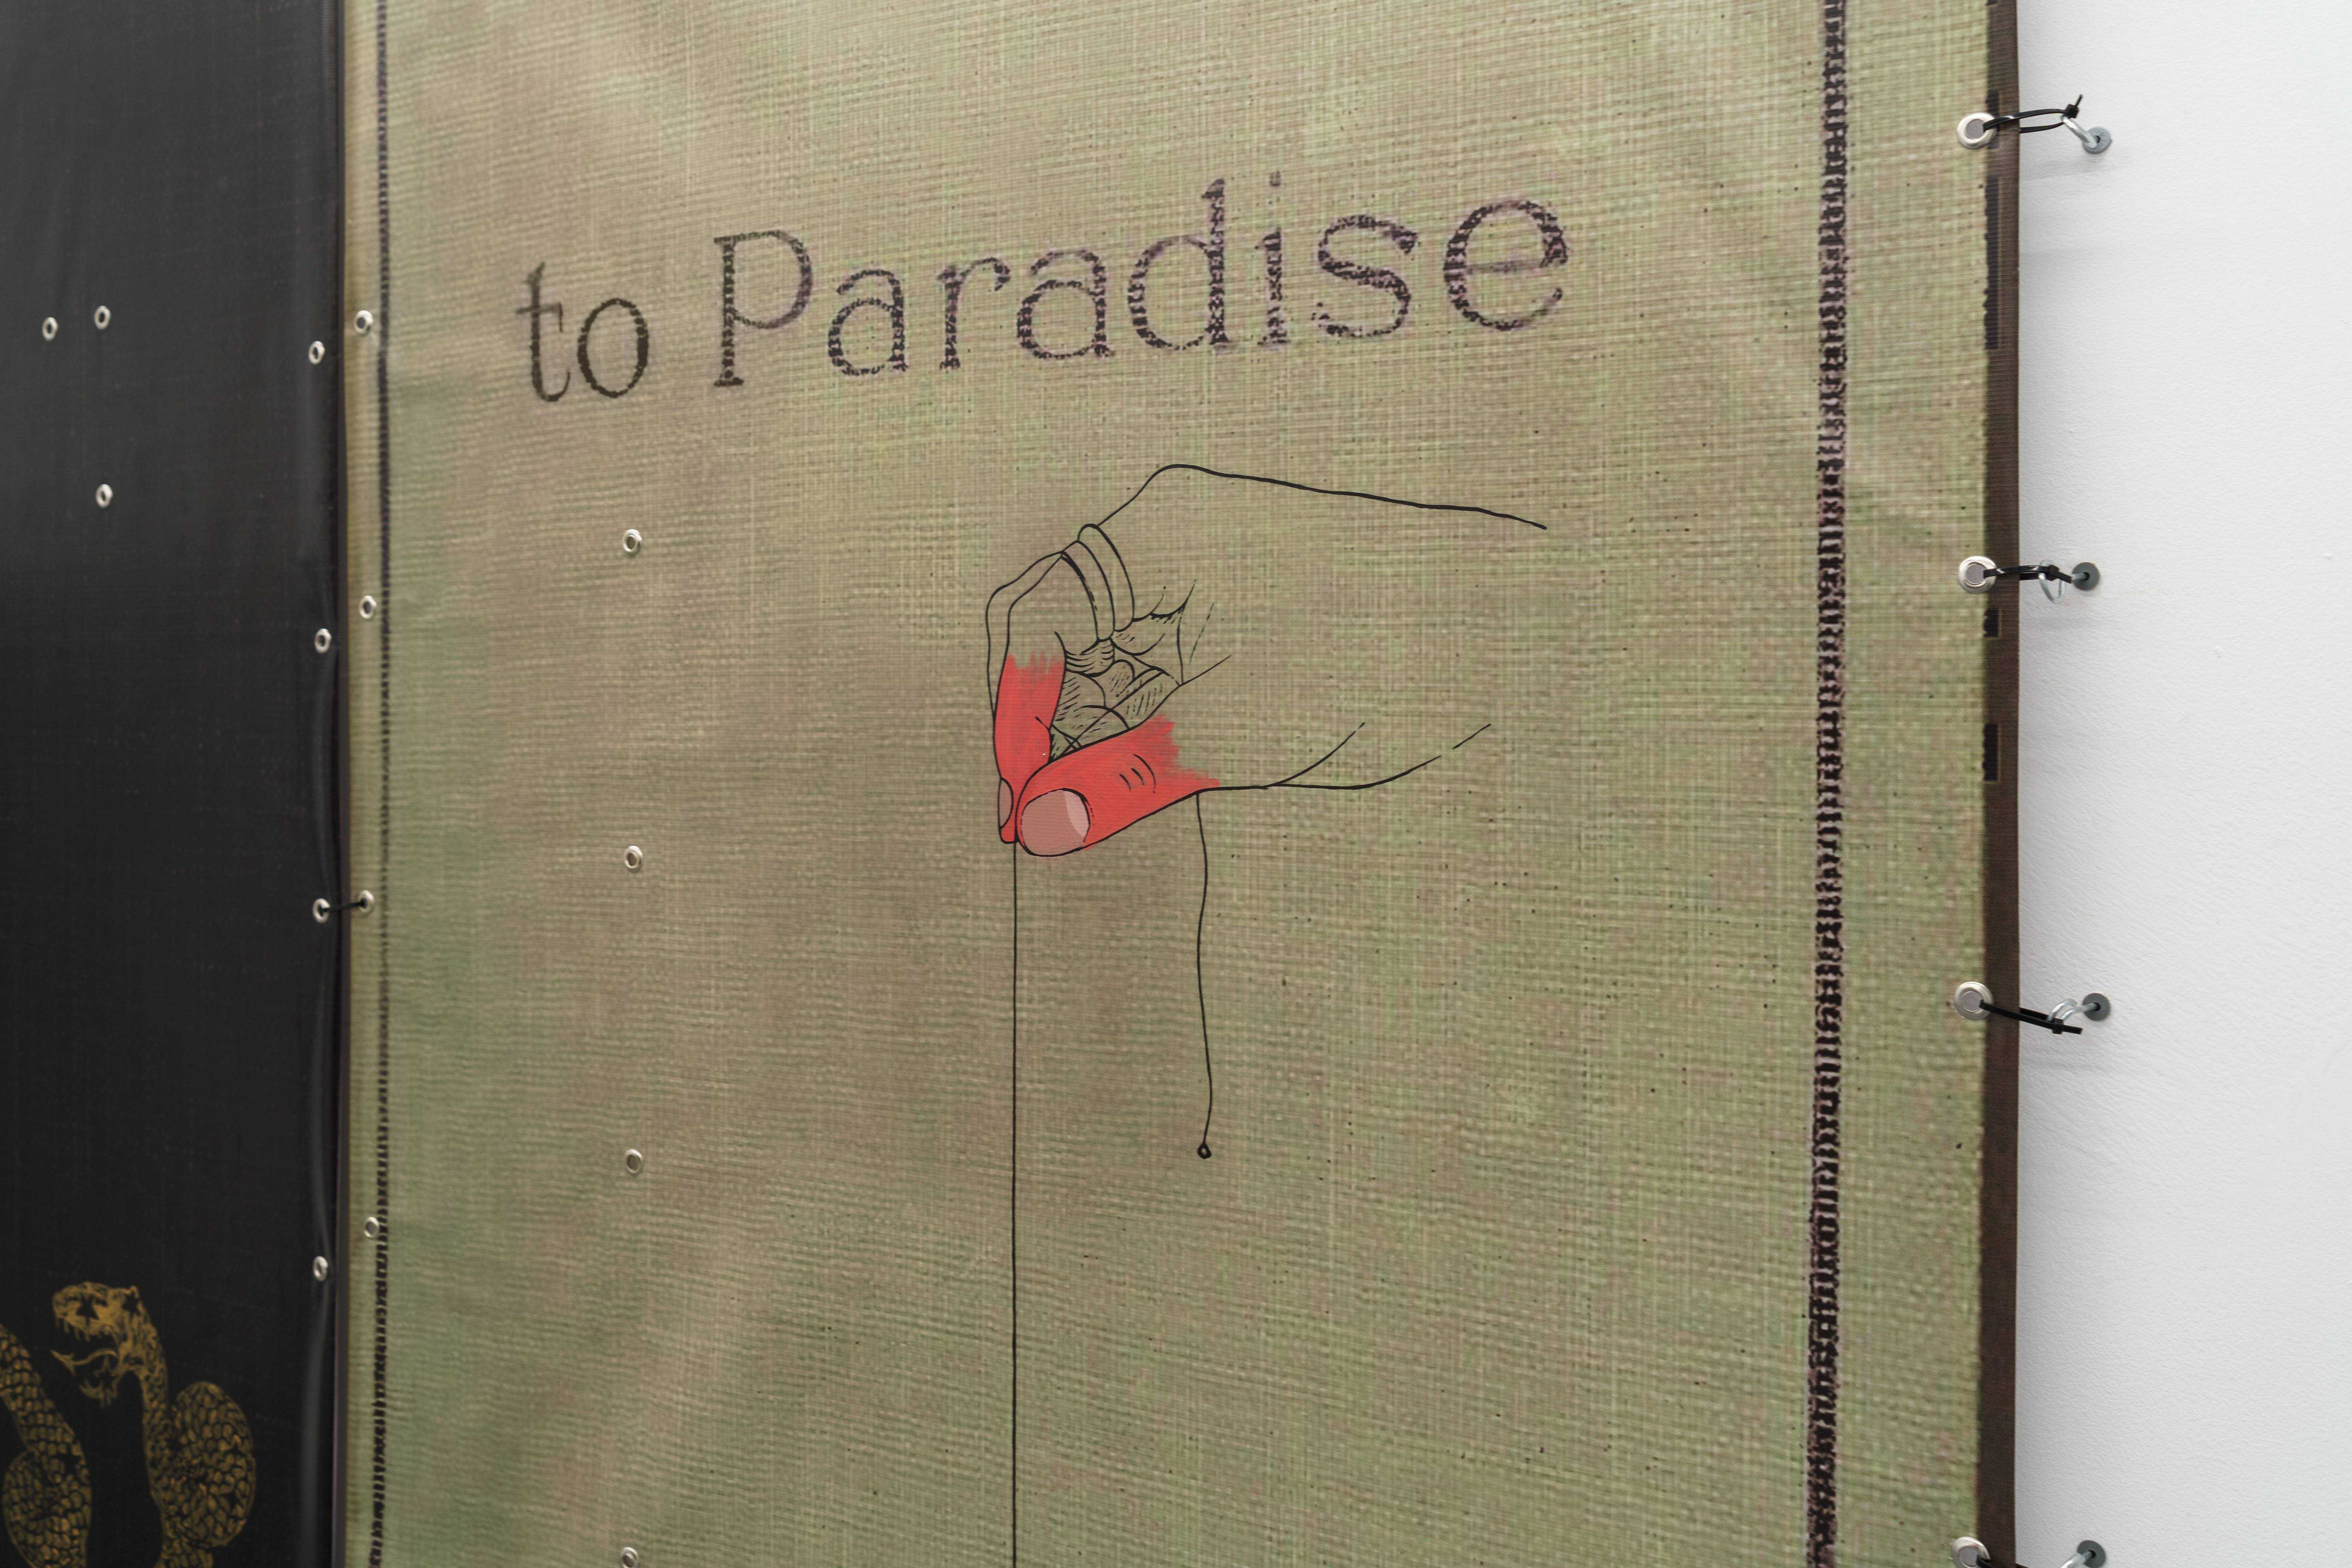  Ian Swanson, â€˜The Divine Plan to Paradiseâ€™, 2023, acrylic and hardware on PVC, 250 x 187 cm (Details)